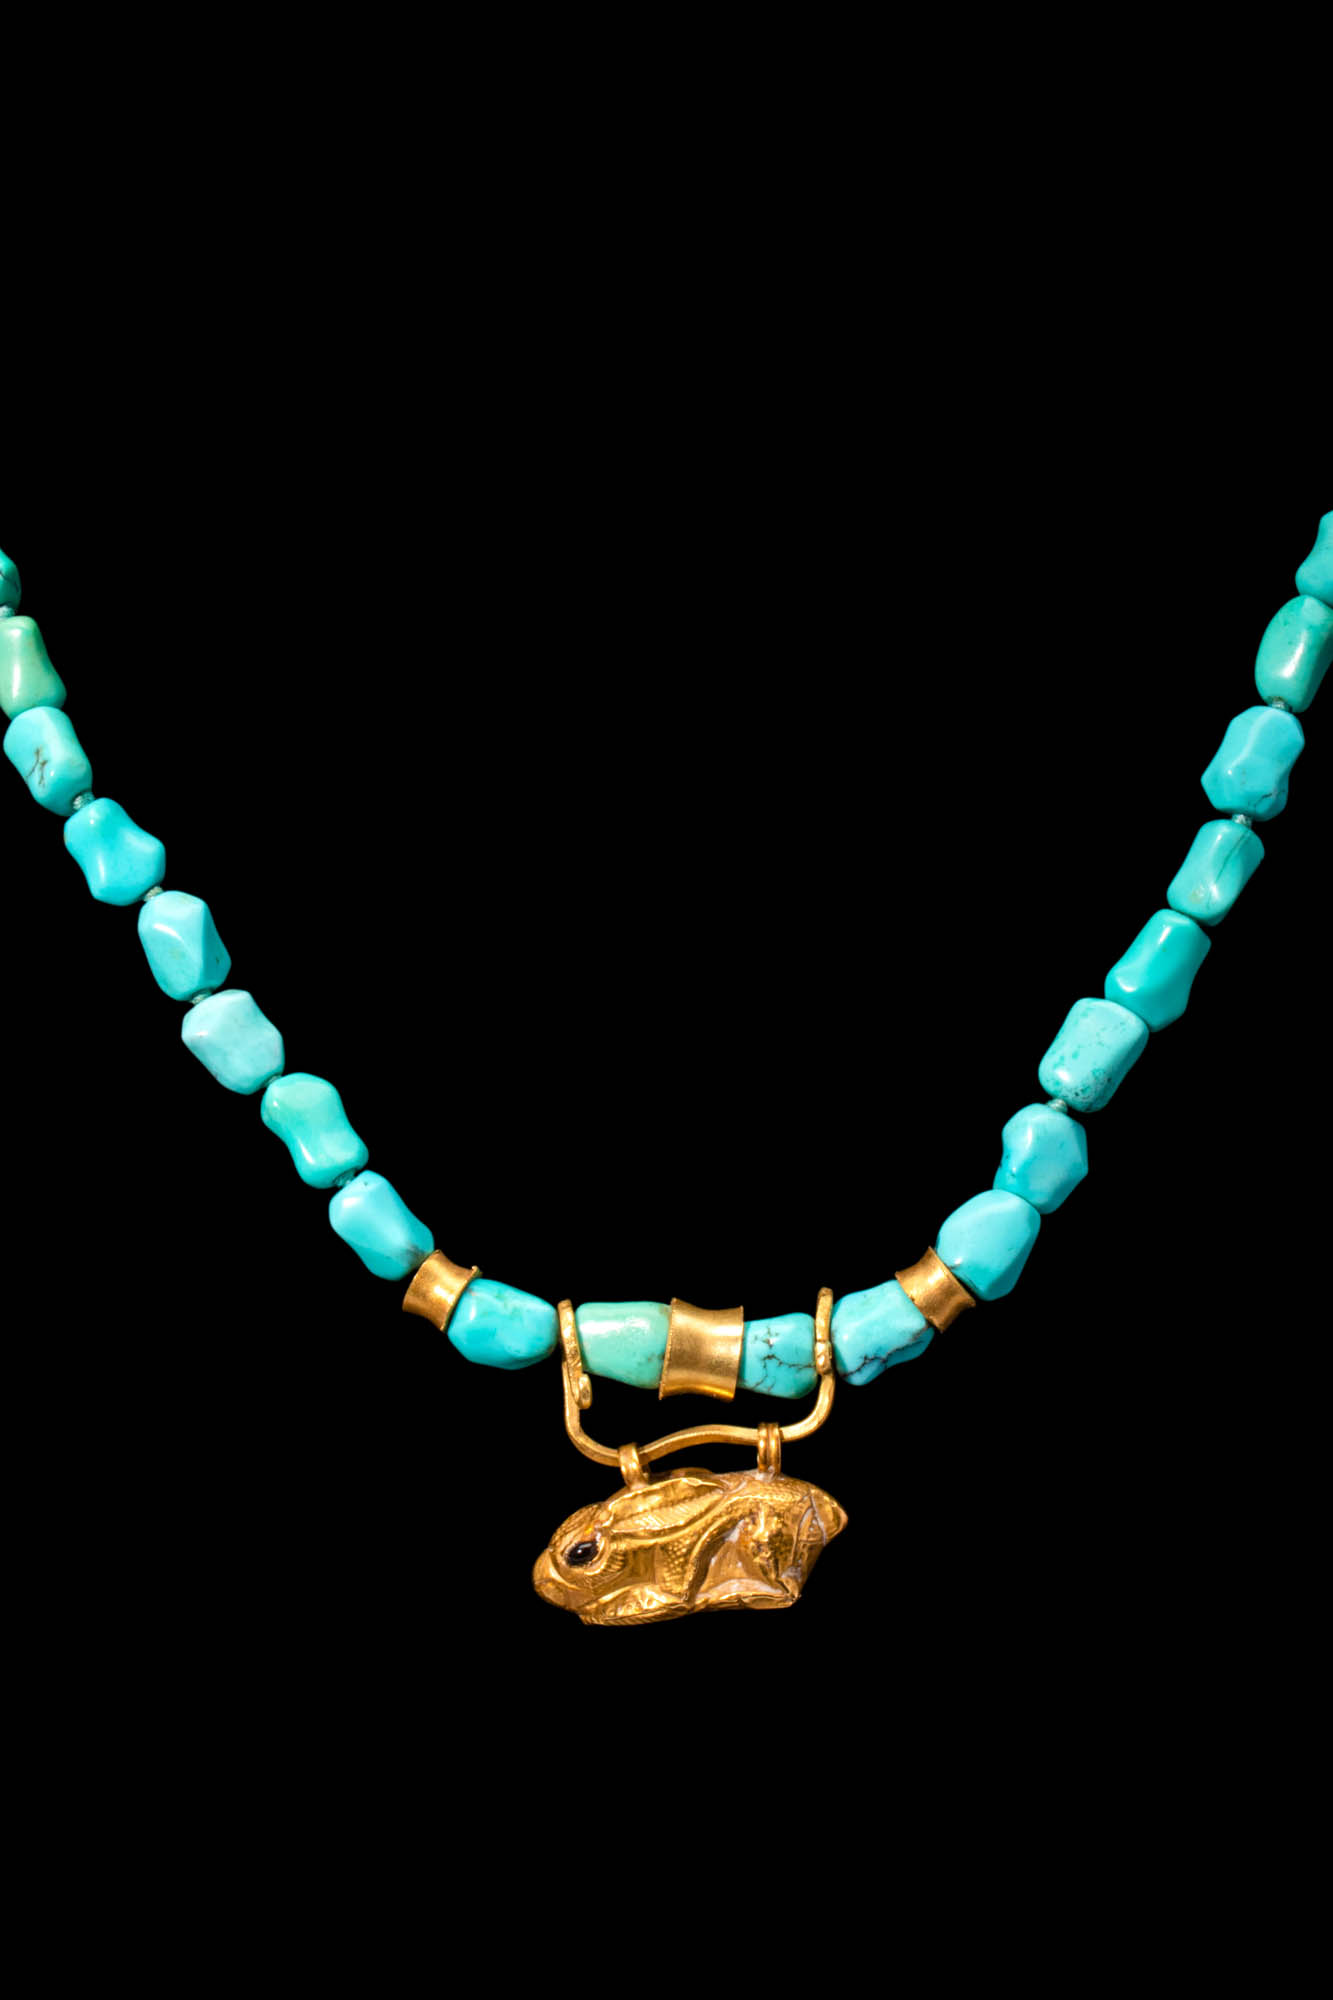 RARE EGYPTIAN TURQUOISE AND GOLD NECKLACE WITH A RABBIT PENDANT - Image 4 of 5